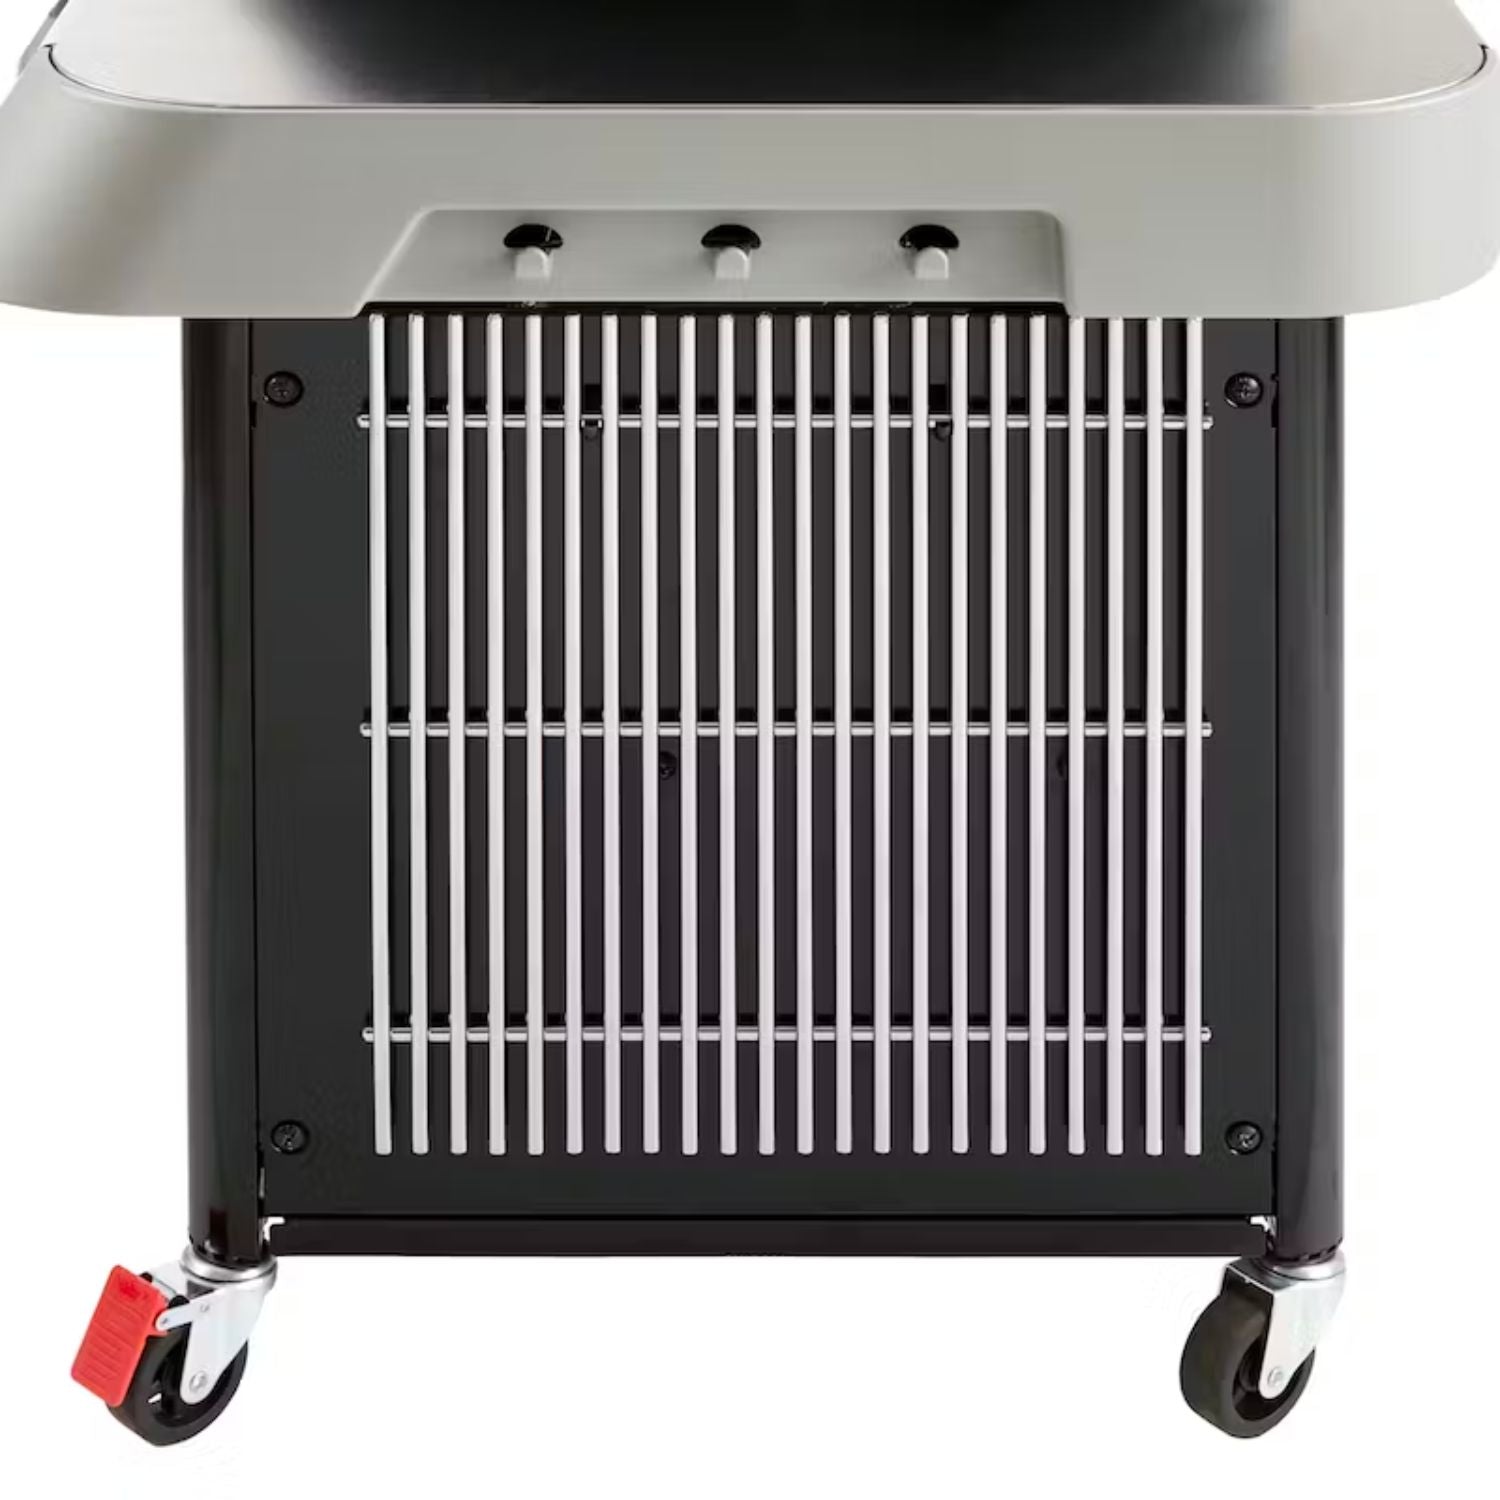 Weber Genesis SE-SPX-435 Smart Grill available at MeatKing.hk5